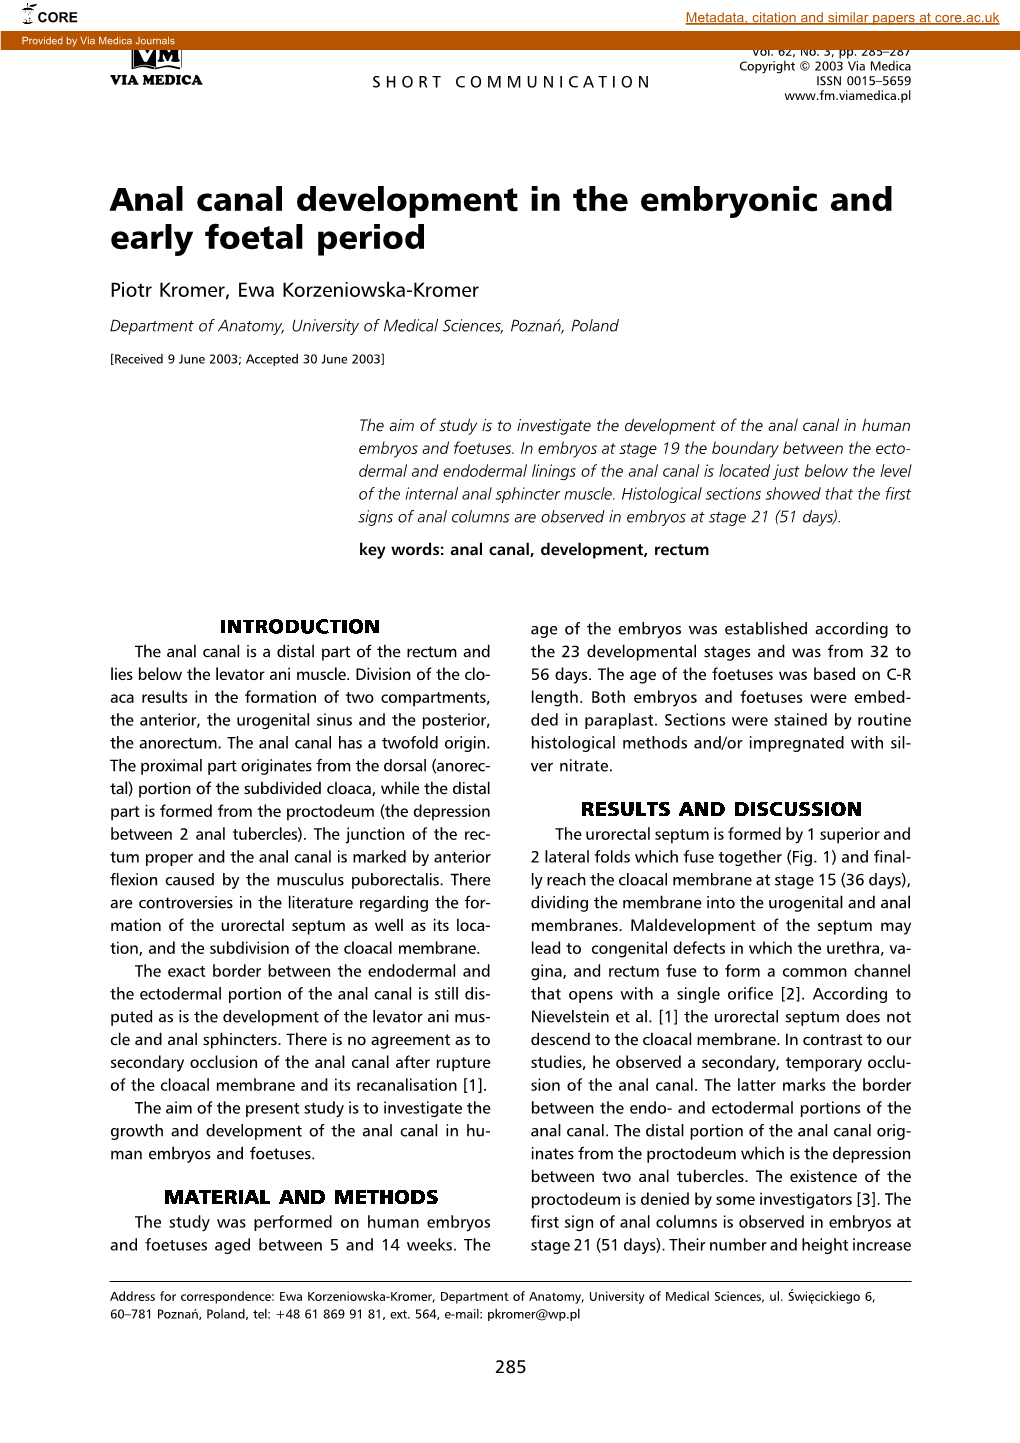 Anal Canal Development in the Embryonic and Early Foetal Period